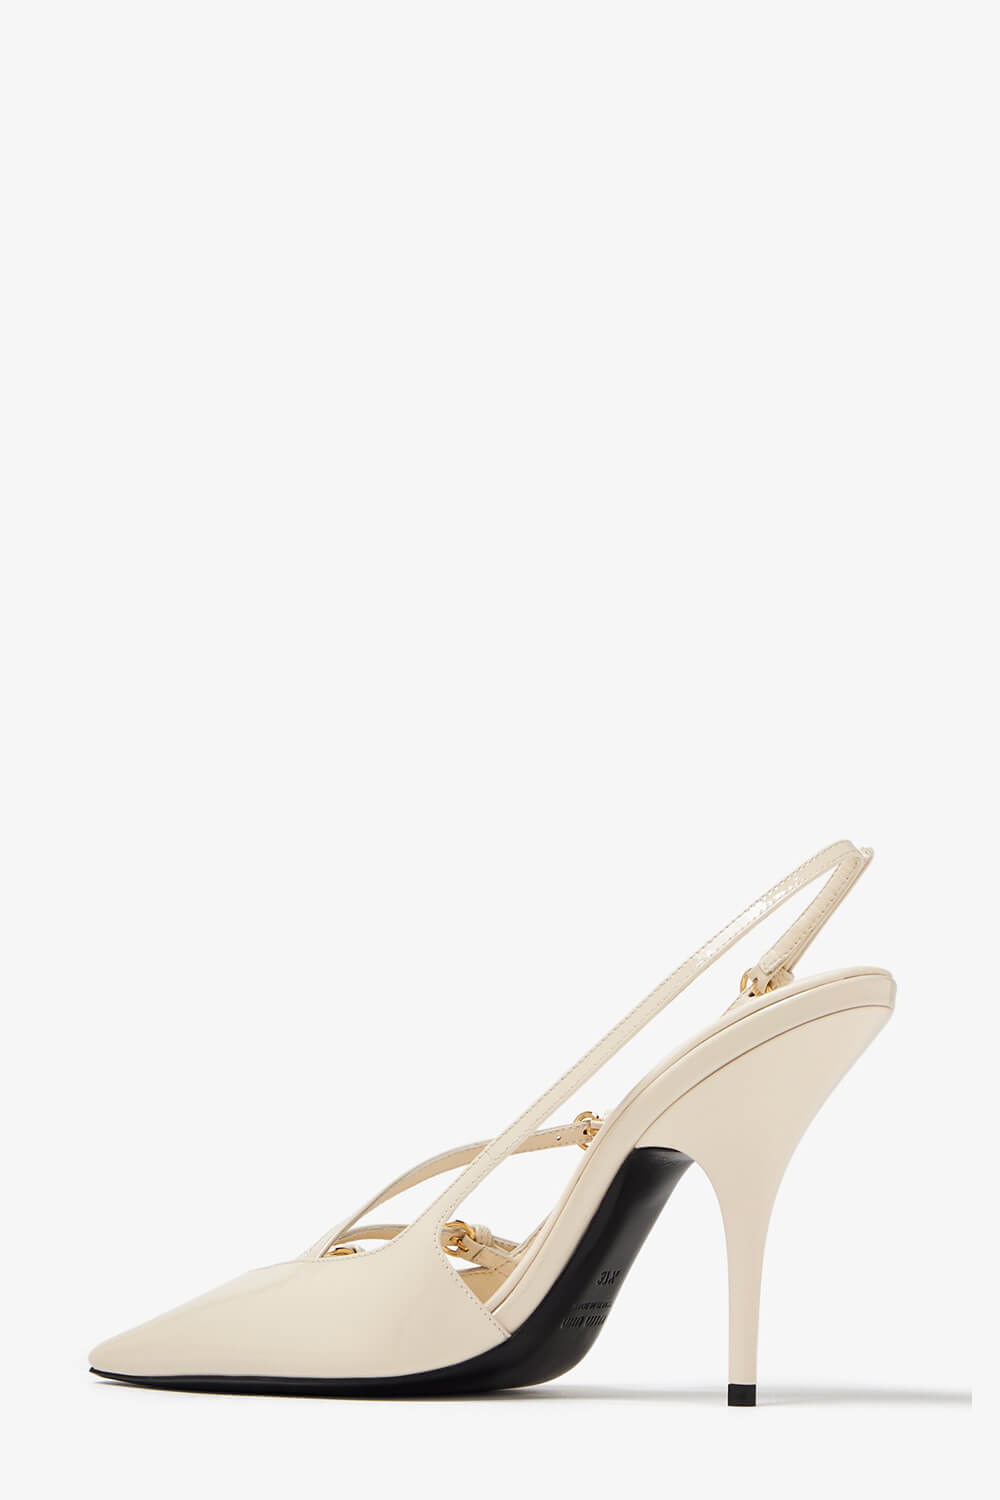 Buckle Patent Pointed Toe Sling Back Court Shoes - Nude